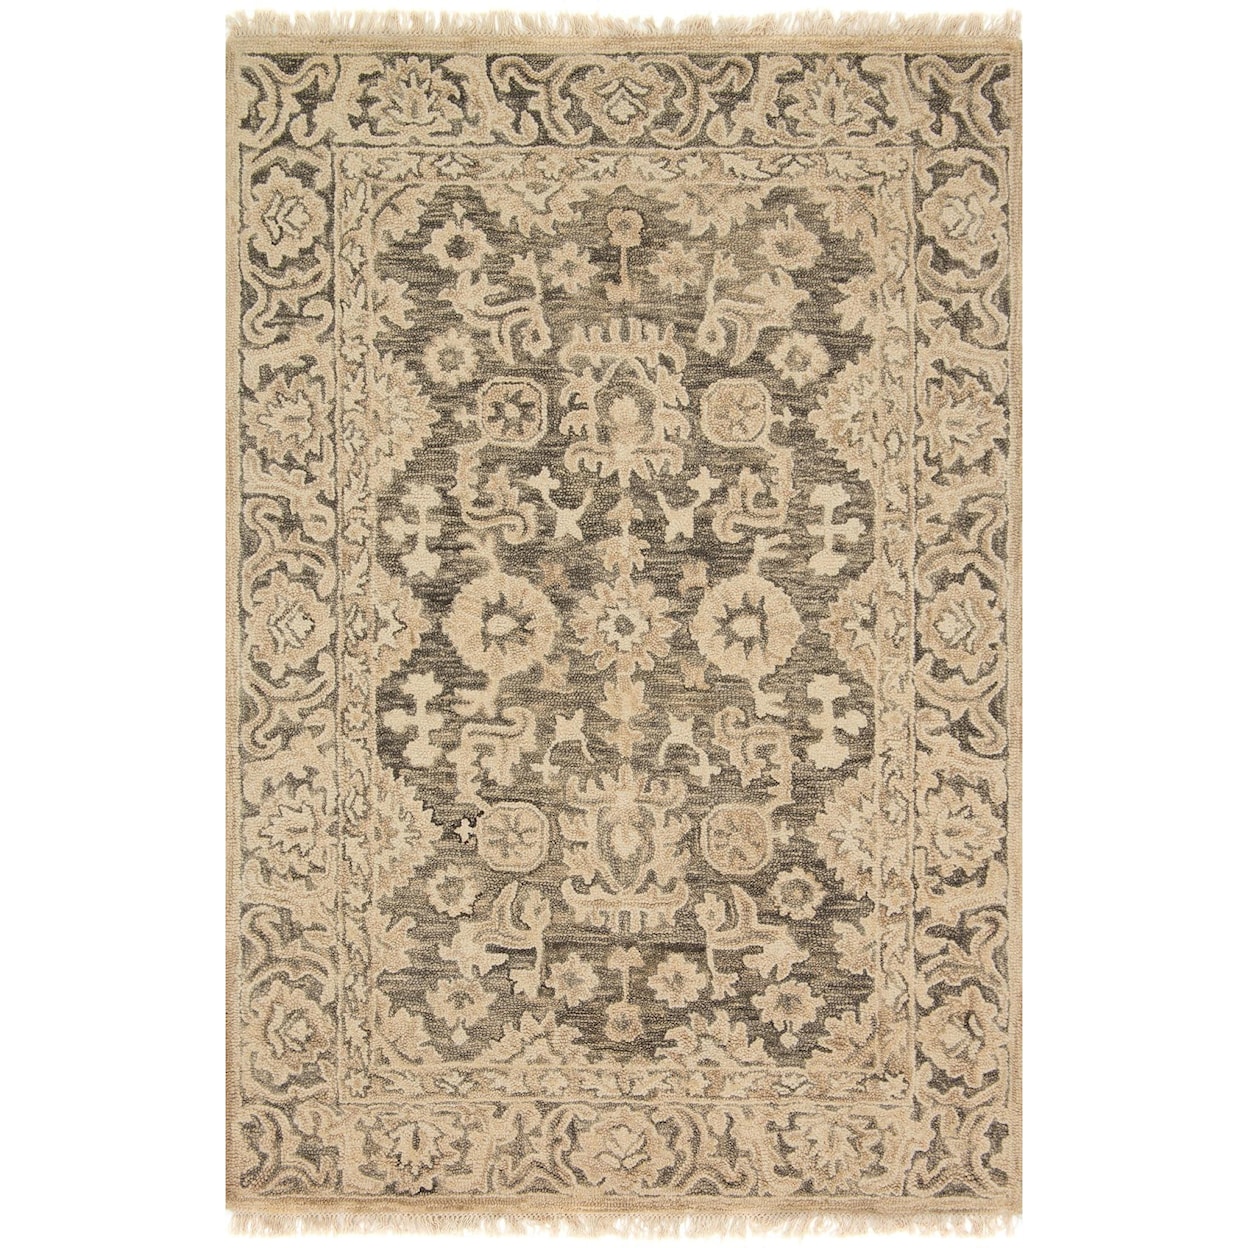 Magnolia Home by Joanna Gaines for Loloi Hanover 5' 0" x 7' 6" Rectangle Rug